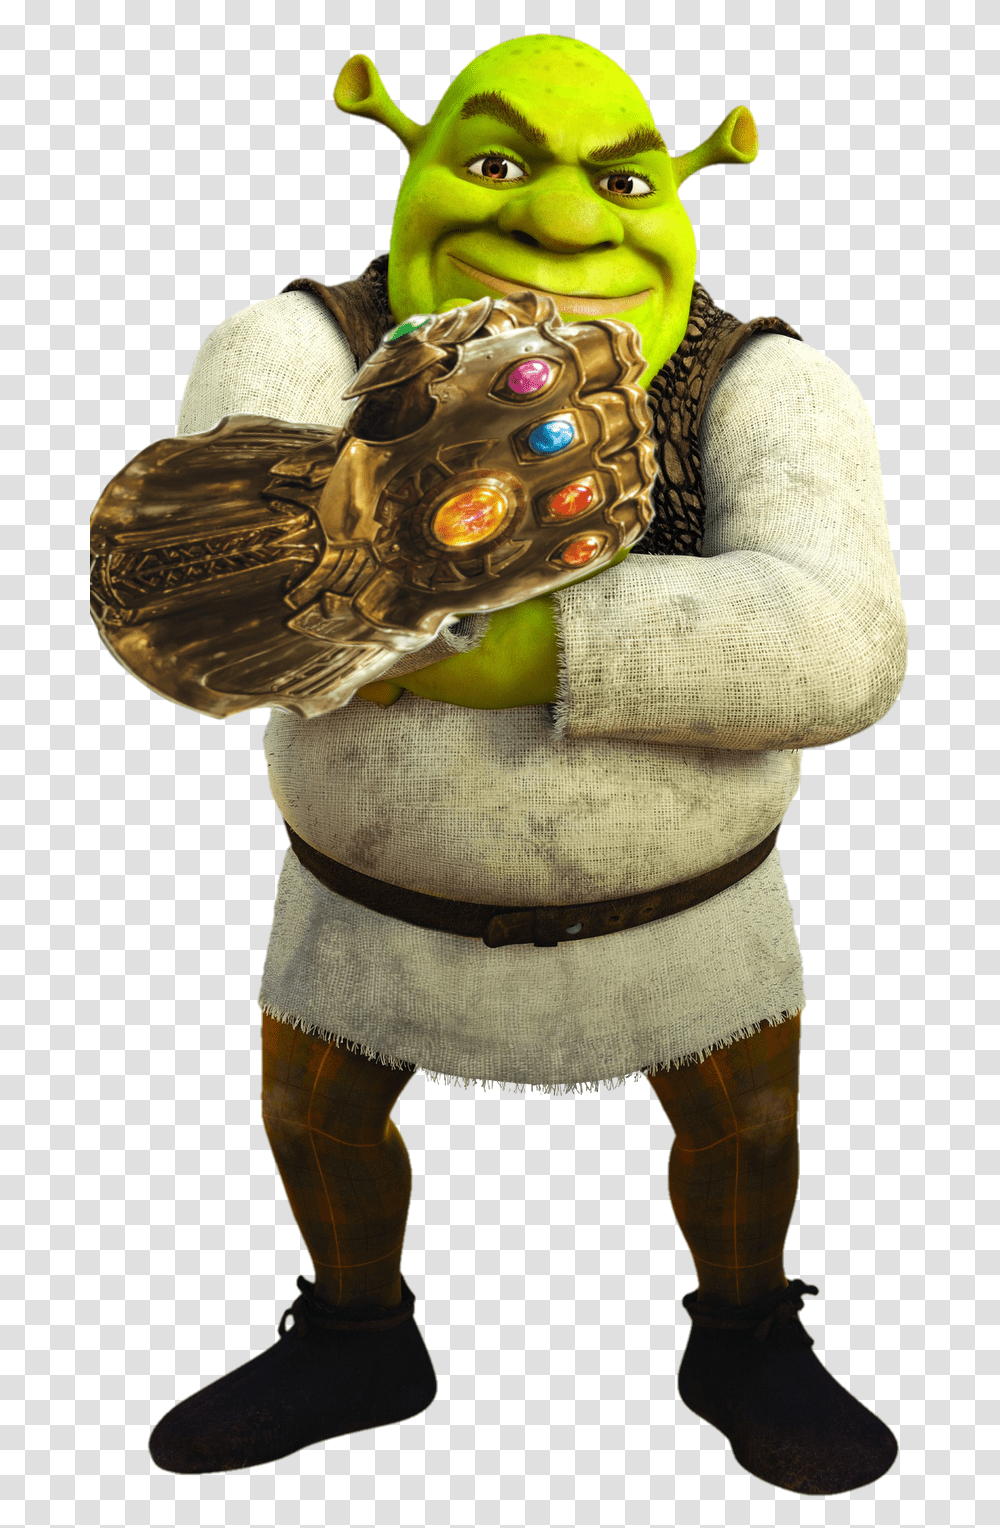 Princess Fiona Donkey Puss In Boots Mascot Shrek Background, Person, Costume Transparent Png